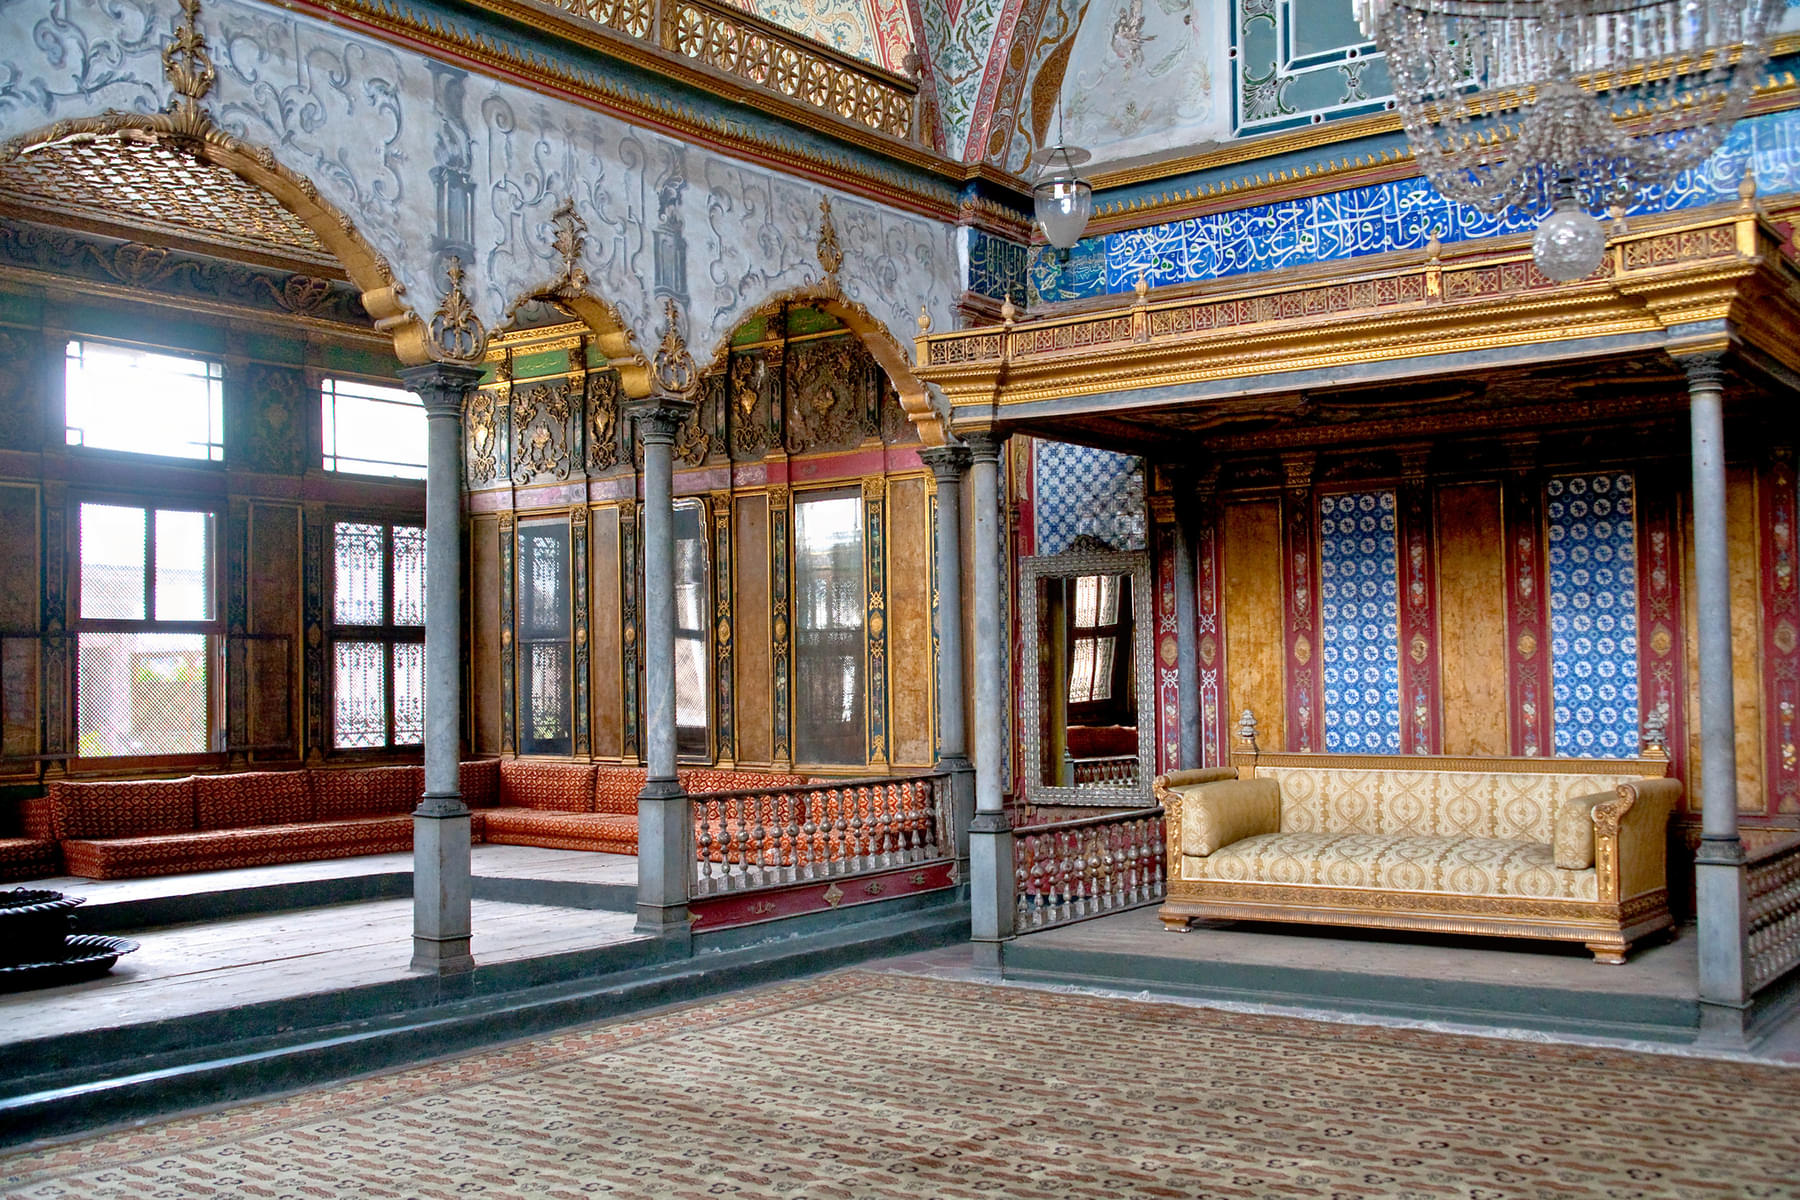 Marvel at the beautiful interiors of the palace inspired by the Ottoman era